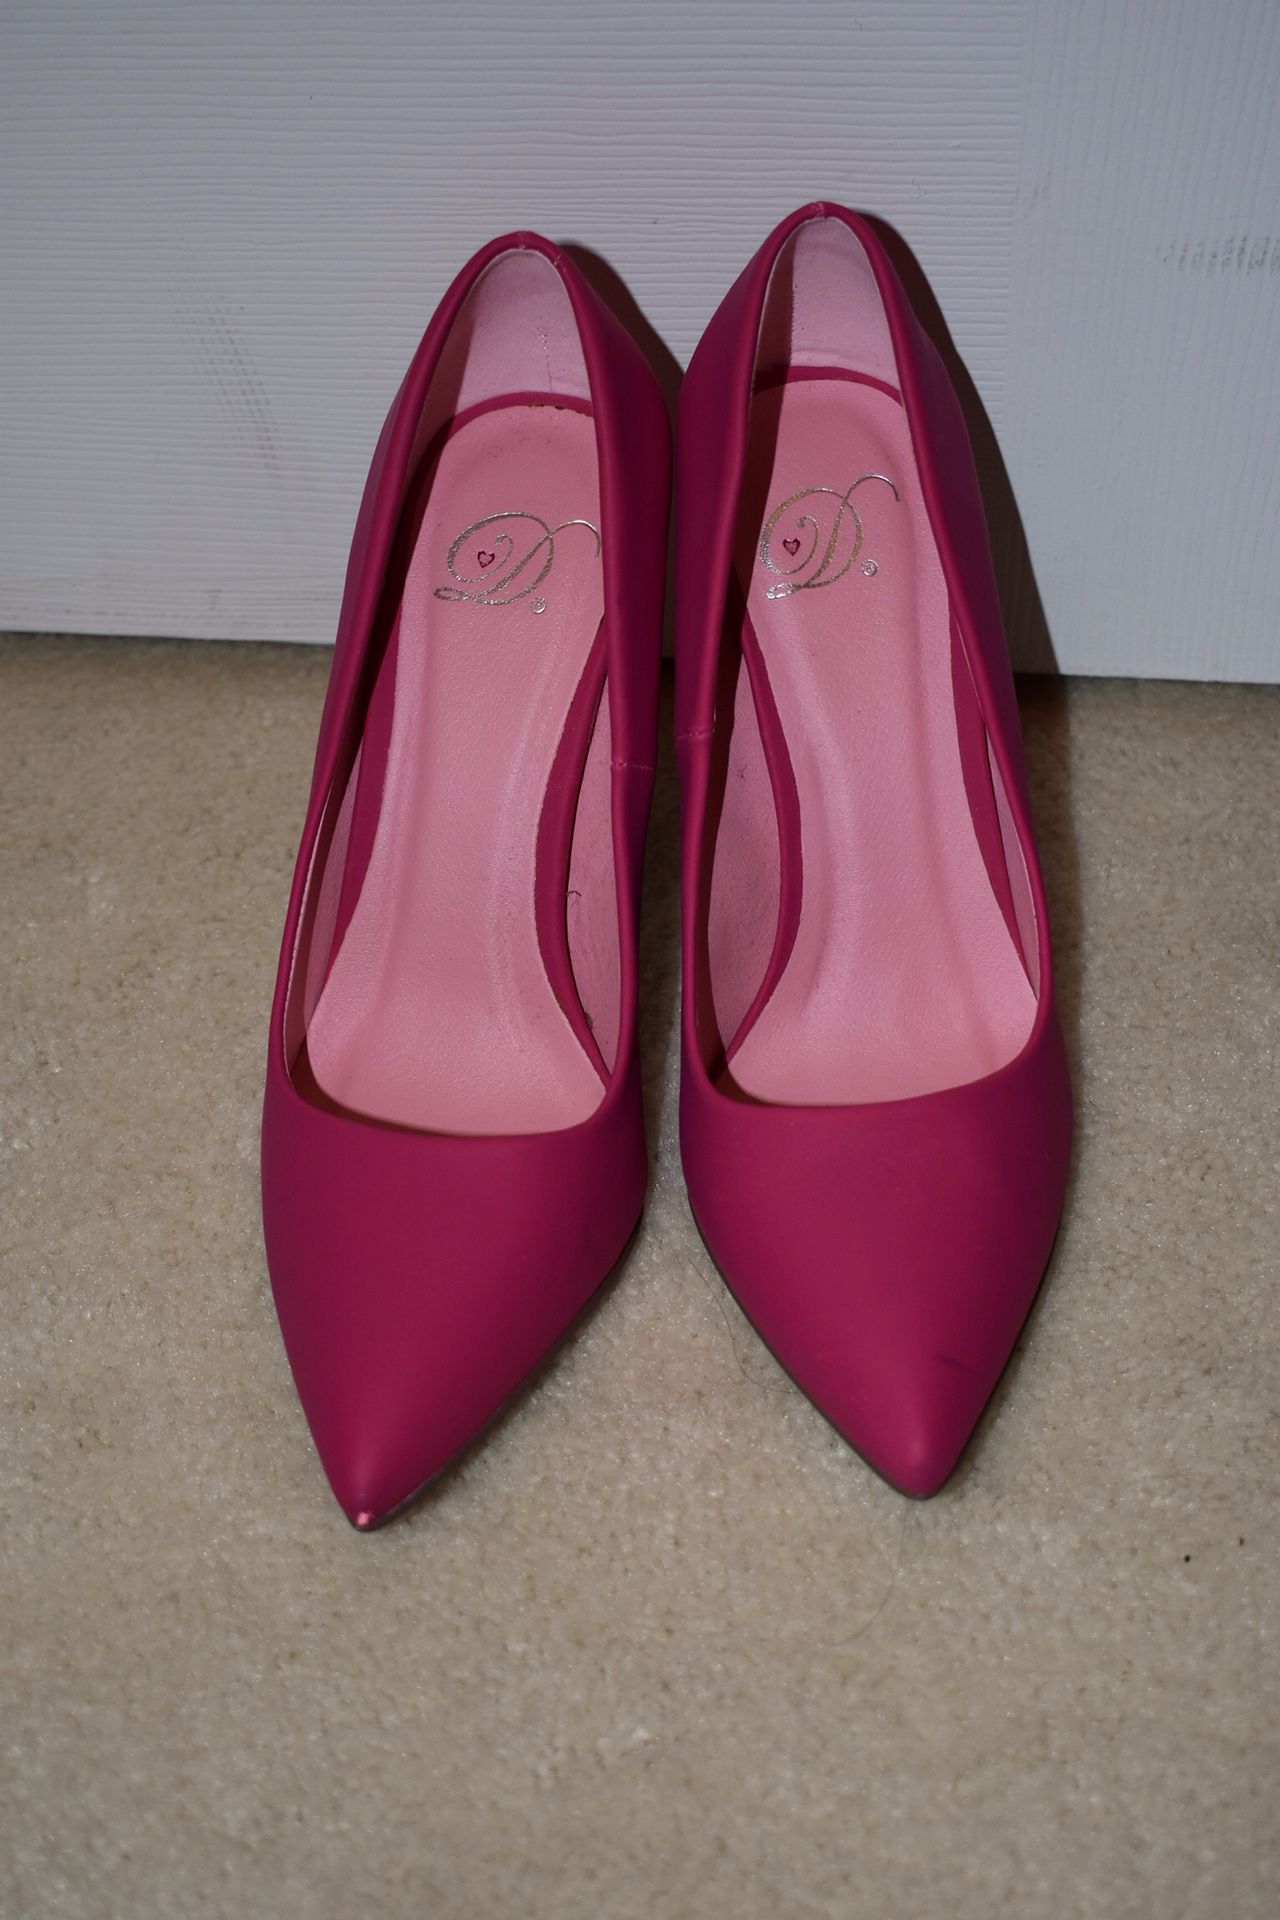 Size 7 pink heels - price not negotiable - pick up only